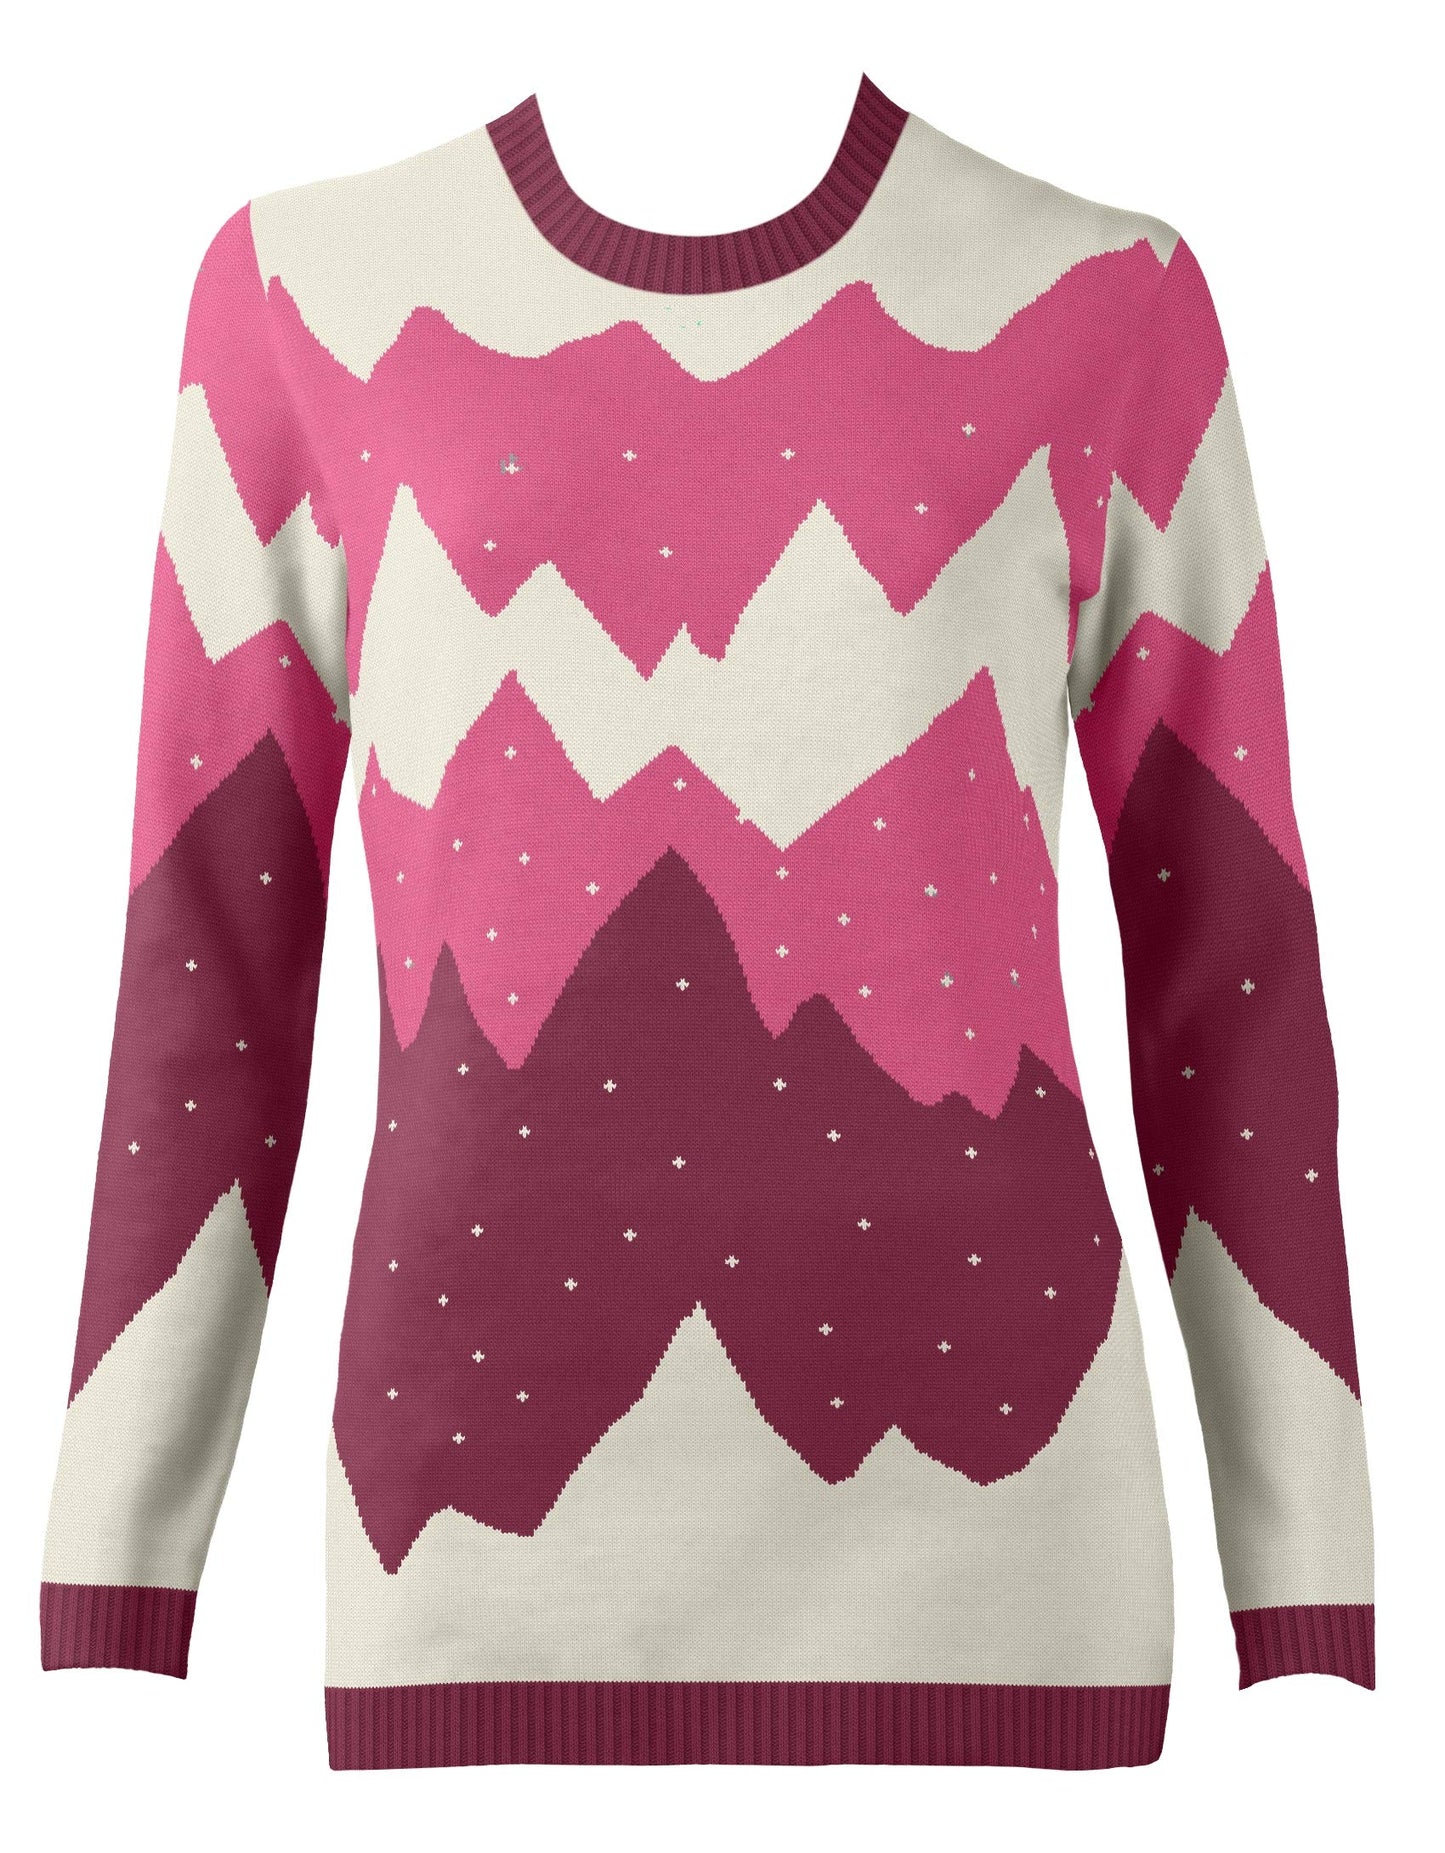 British Christmas Jumpers Women's Mountain Peak Pink Eco Christmas Jumper Pullover Sweater